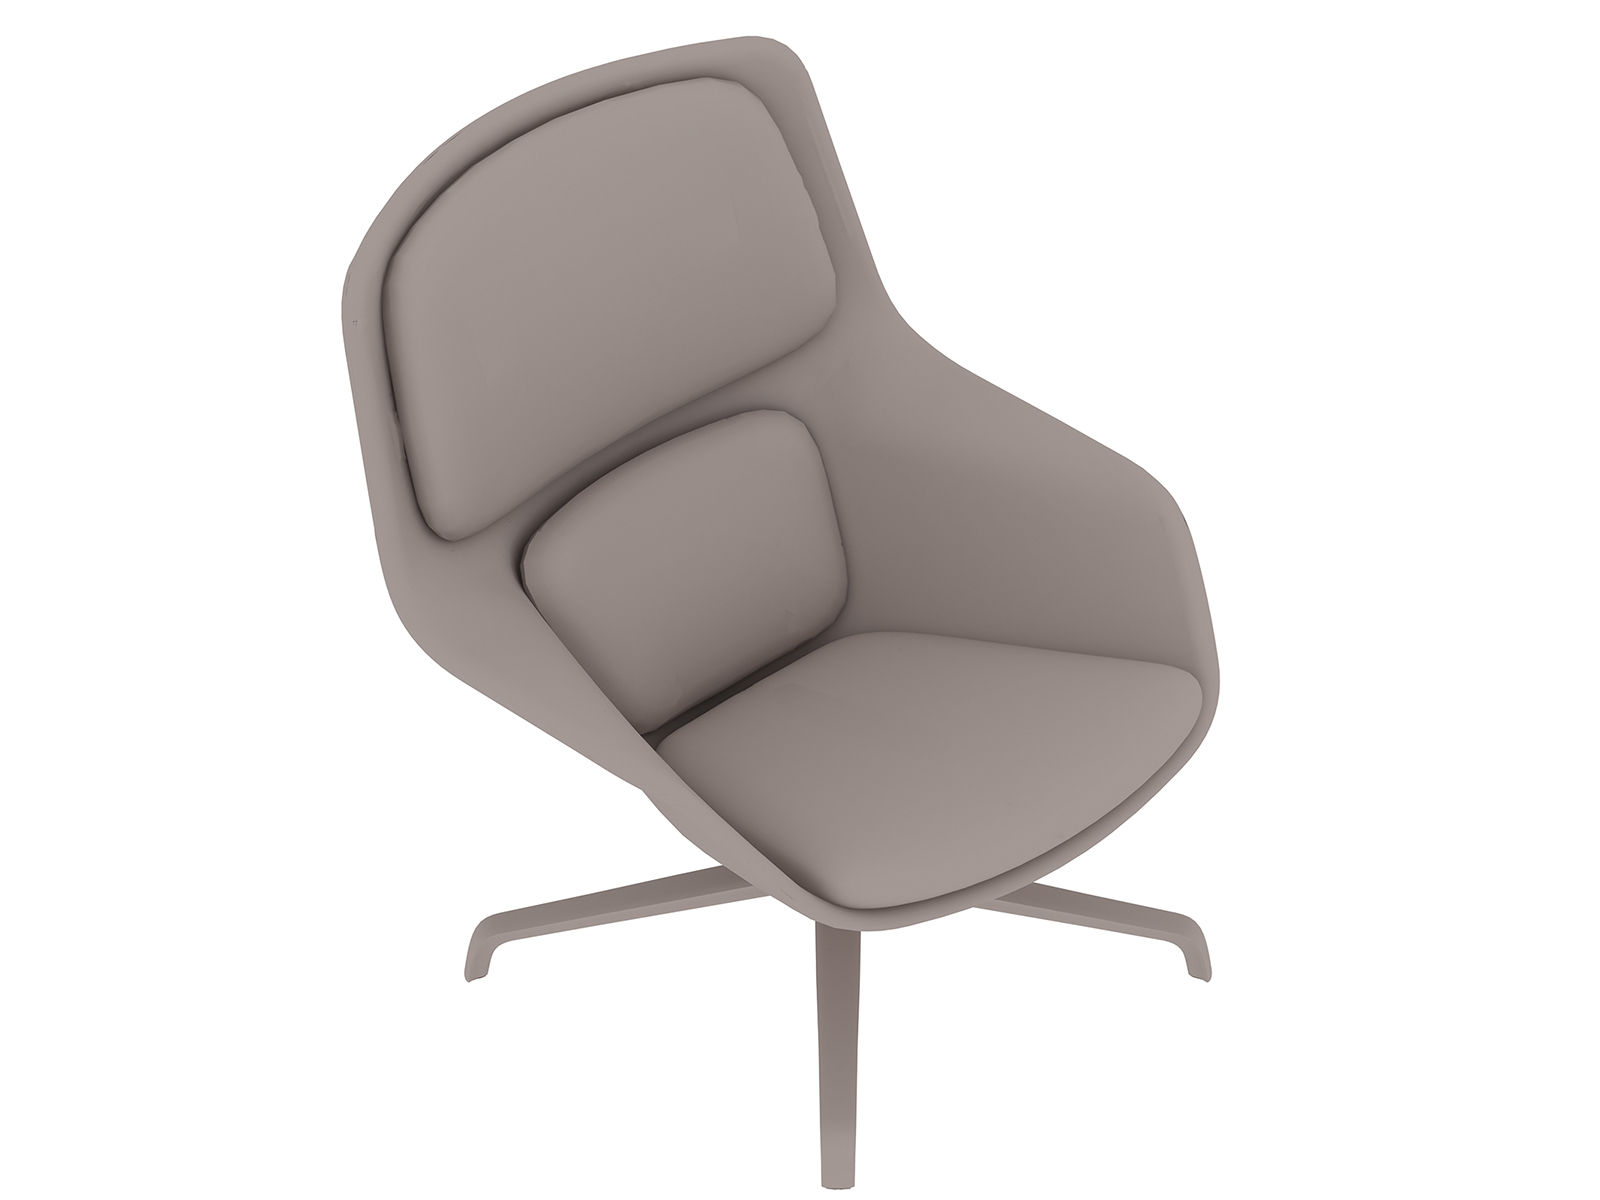 https://www.hermanmiller.com/content/dam/hmicom/app_assets/product_models/s/striad_lounge_chair_and_ottoman/striad_lounge_chair_mid_back_4_star_base/HMI_Striad_Lounge_Chair_Mid_Back_4_Star_Base_mdl_c.jpg